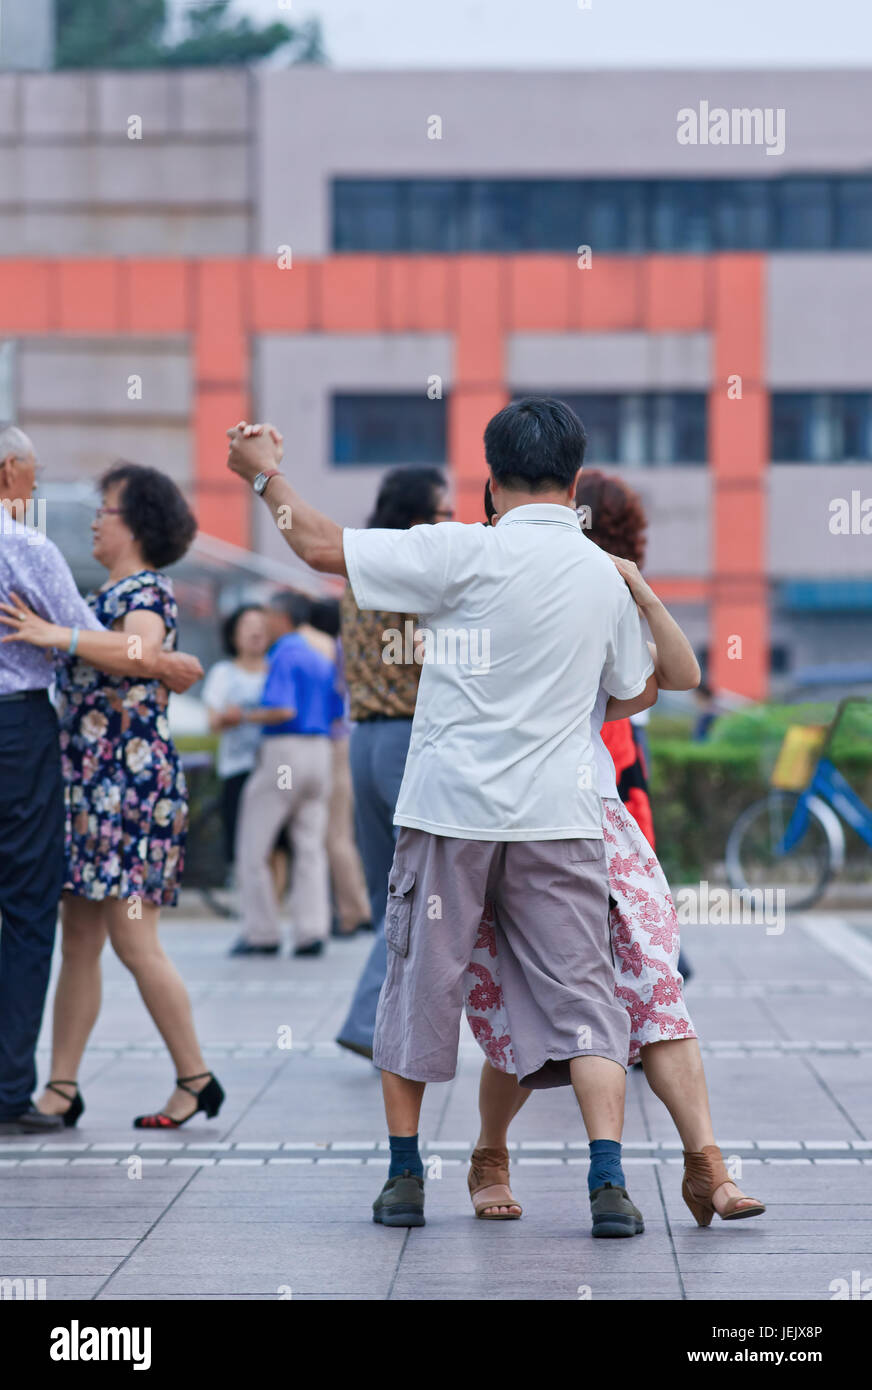 BEIJING-JULY 10, 2015. Collective square dancing is a very popular phenomenon in China and for many people a sort of recreation. Stock Photo